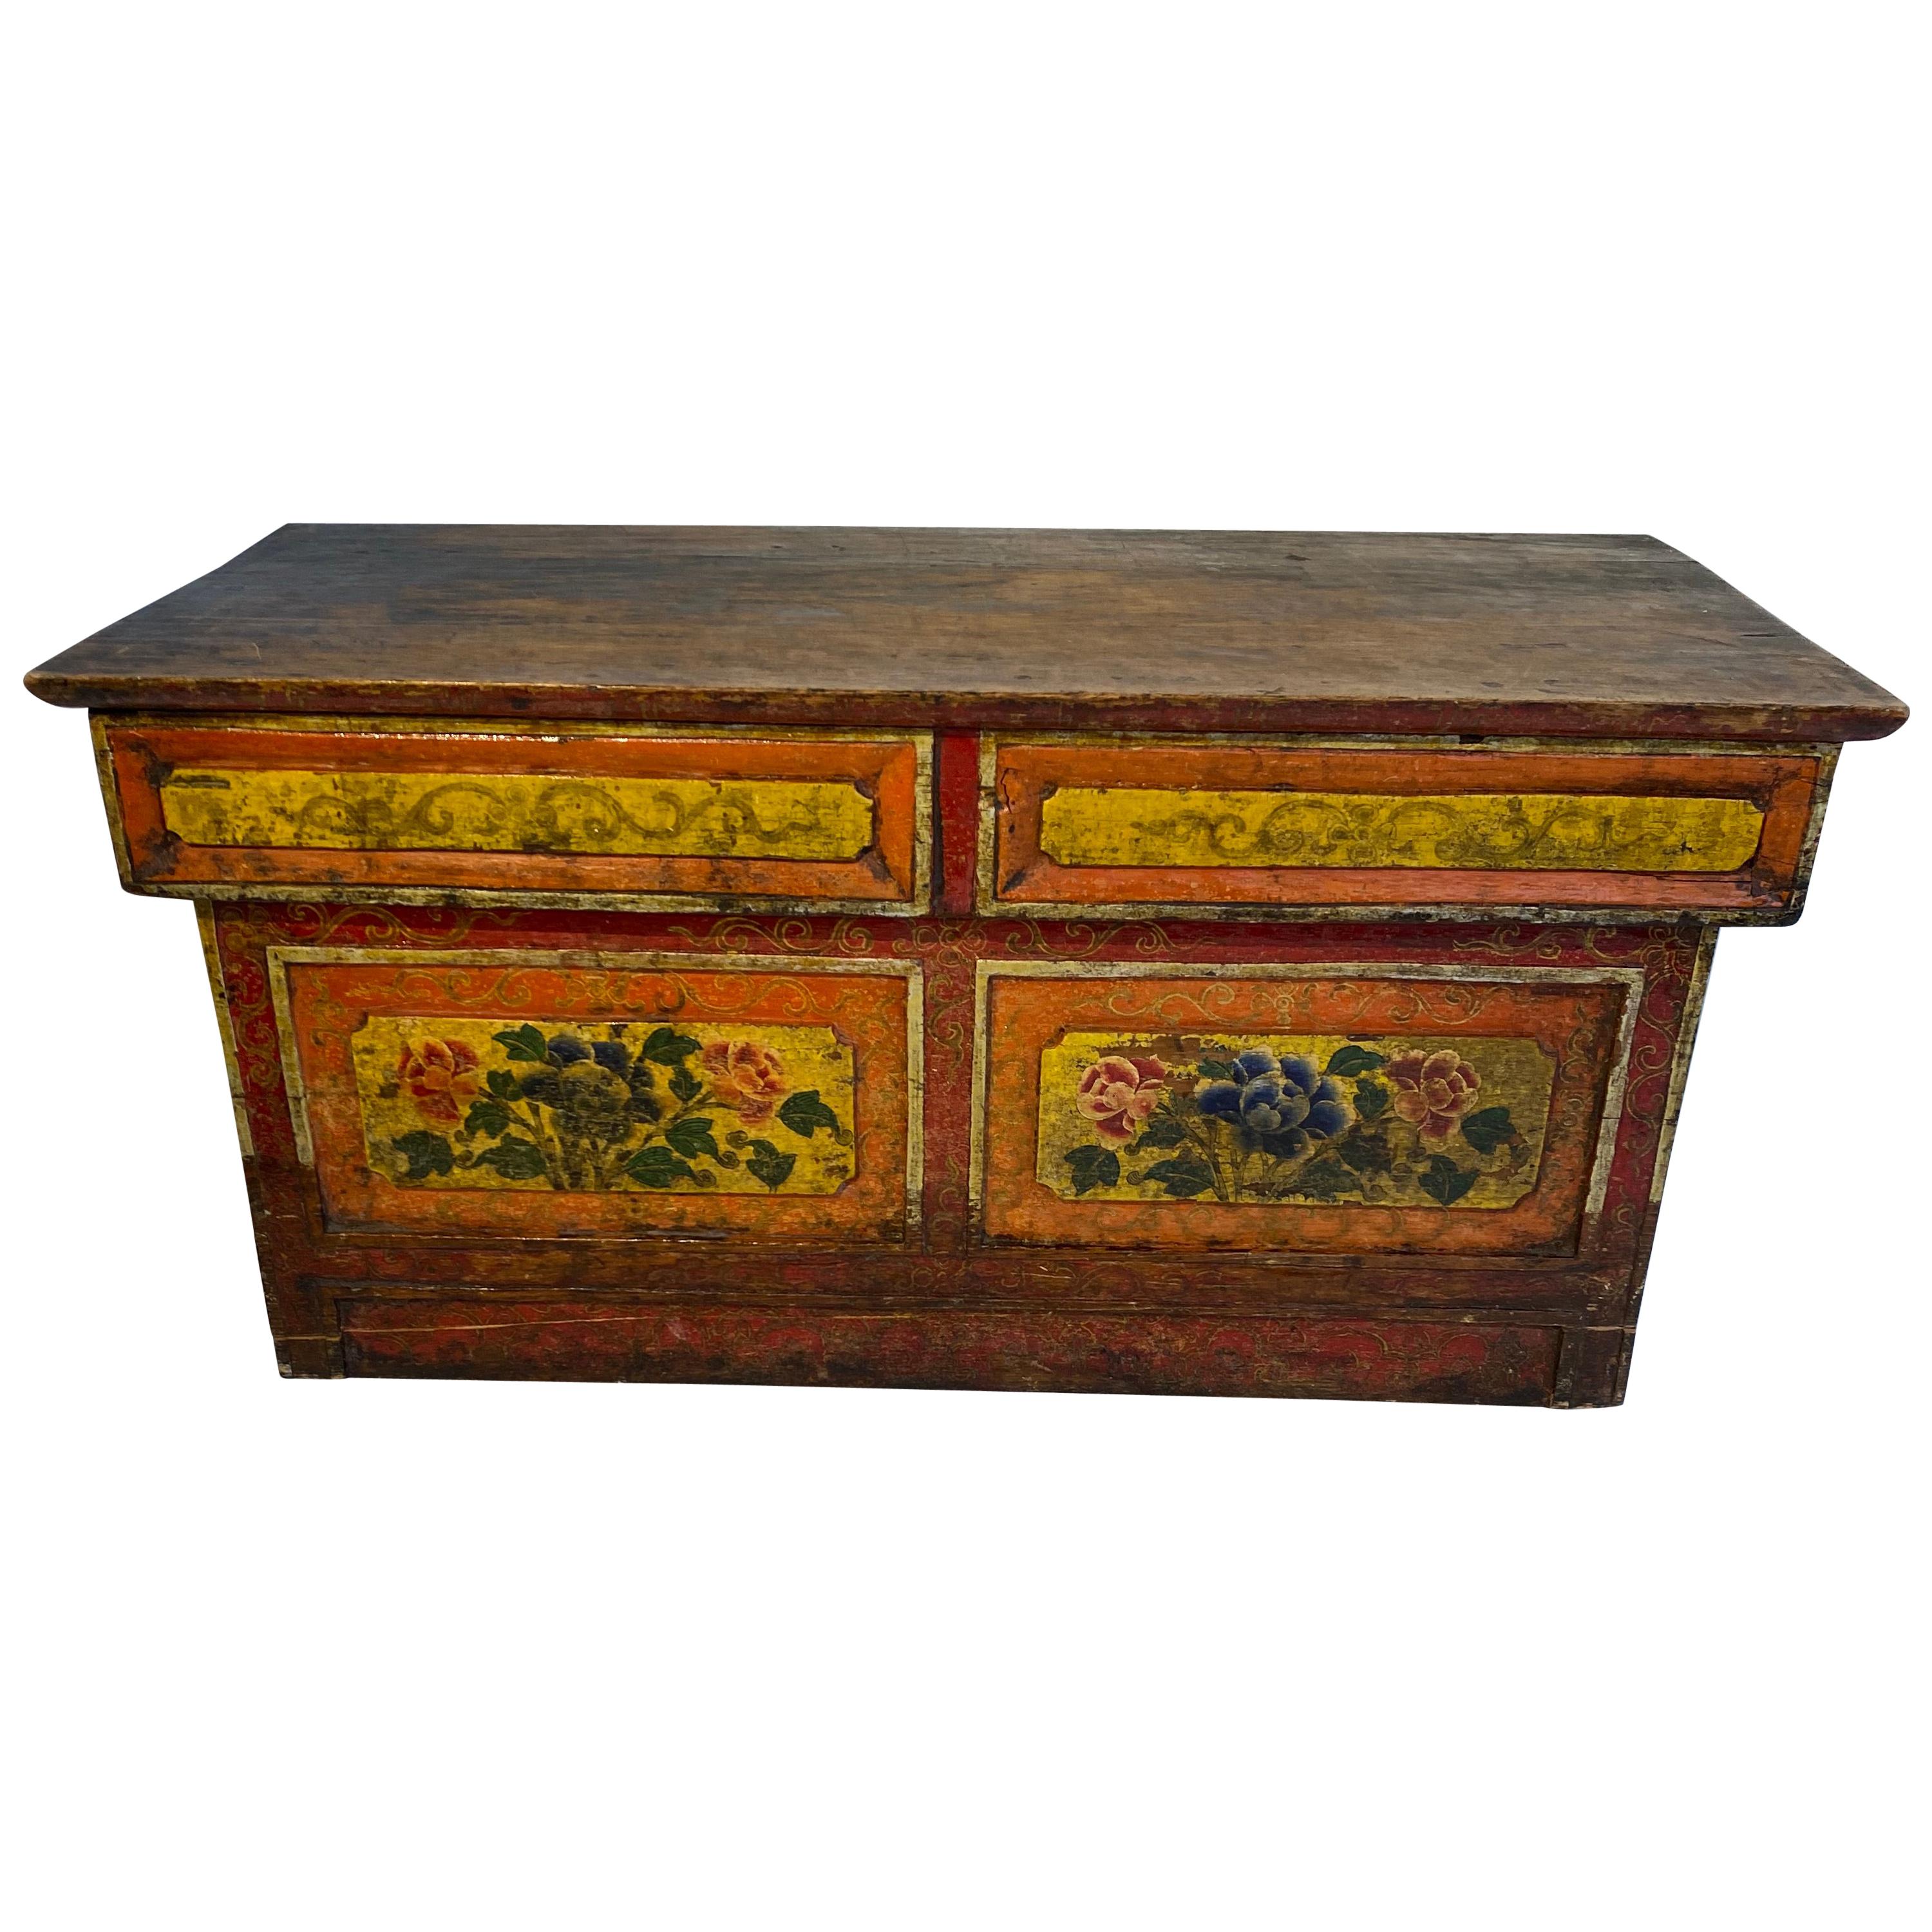 Small Asian Red And Yellow Painted Folk Art Desk-Top Writing Desk